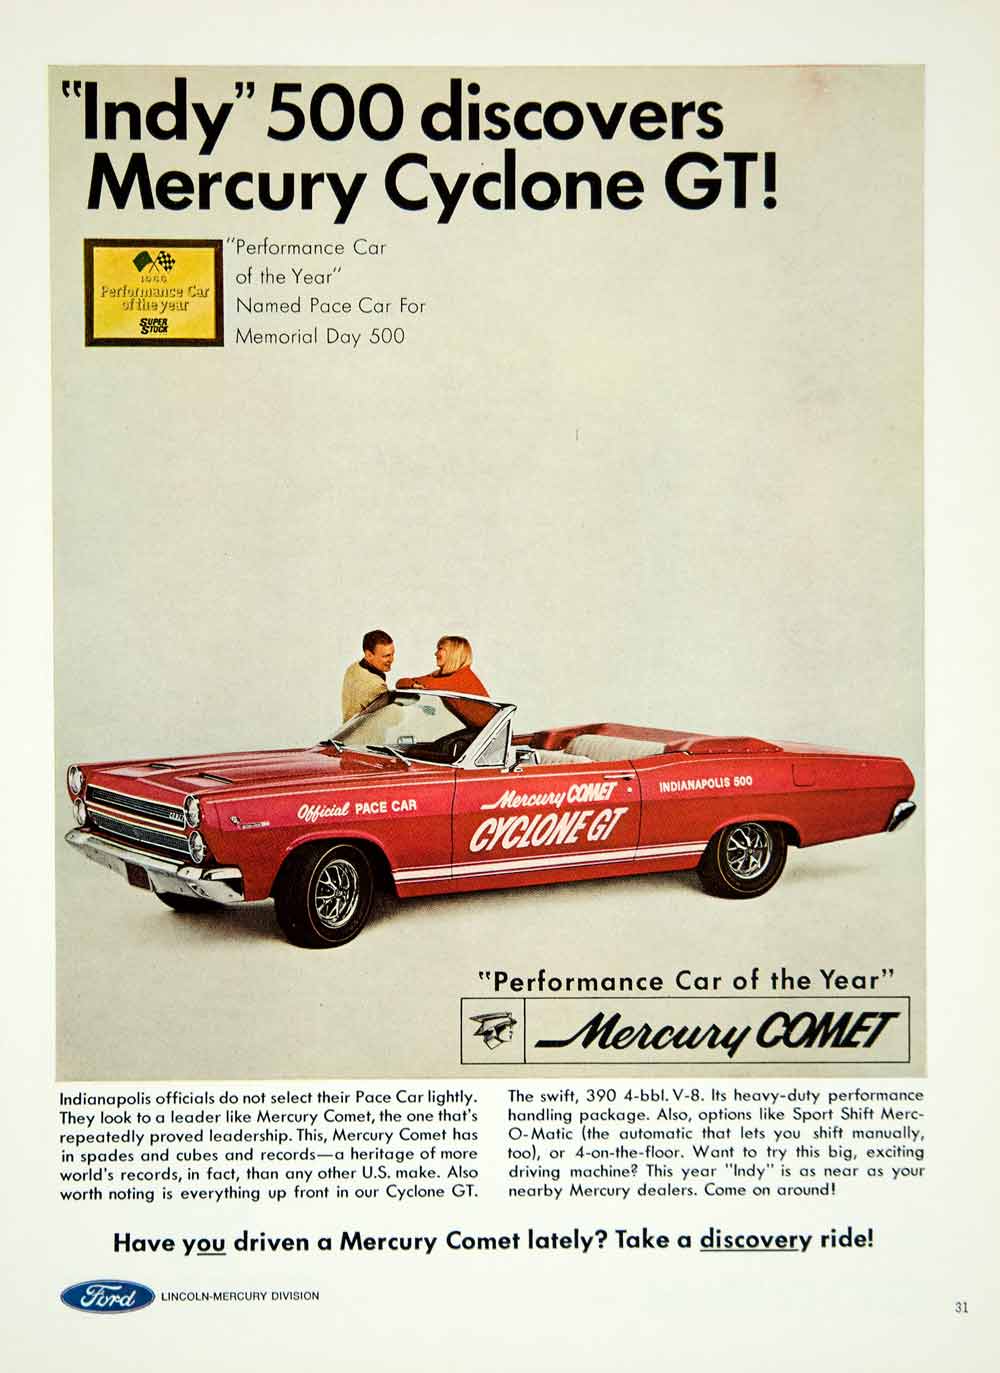 1966 Ad Ford Mercury Comet Cyclone GT Indianapolis Indy 500 Pace Car YMMA3